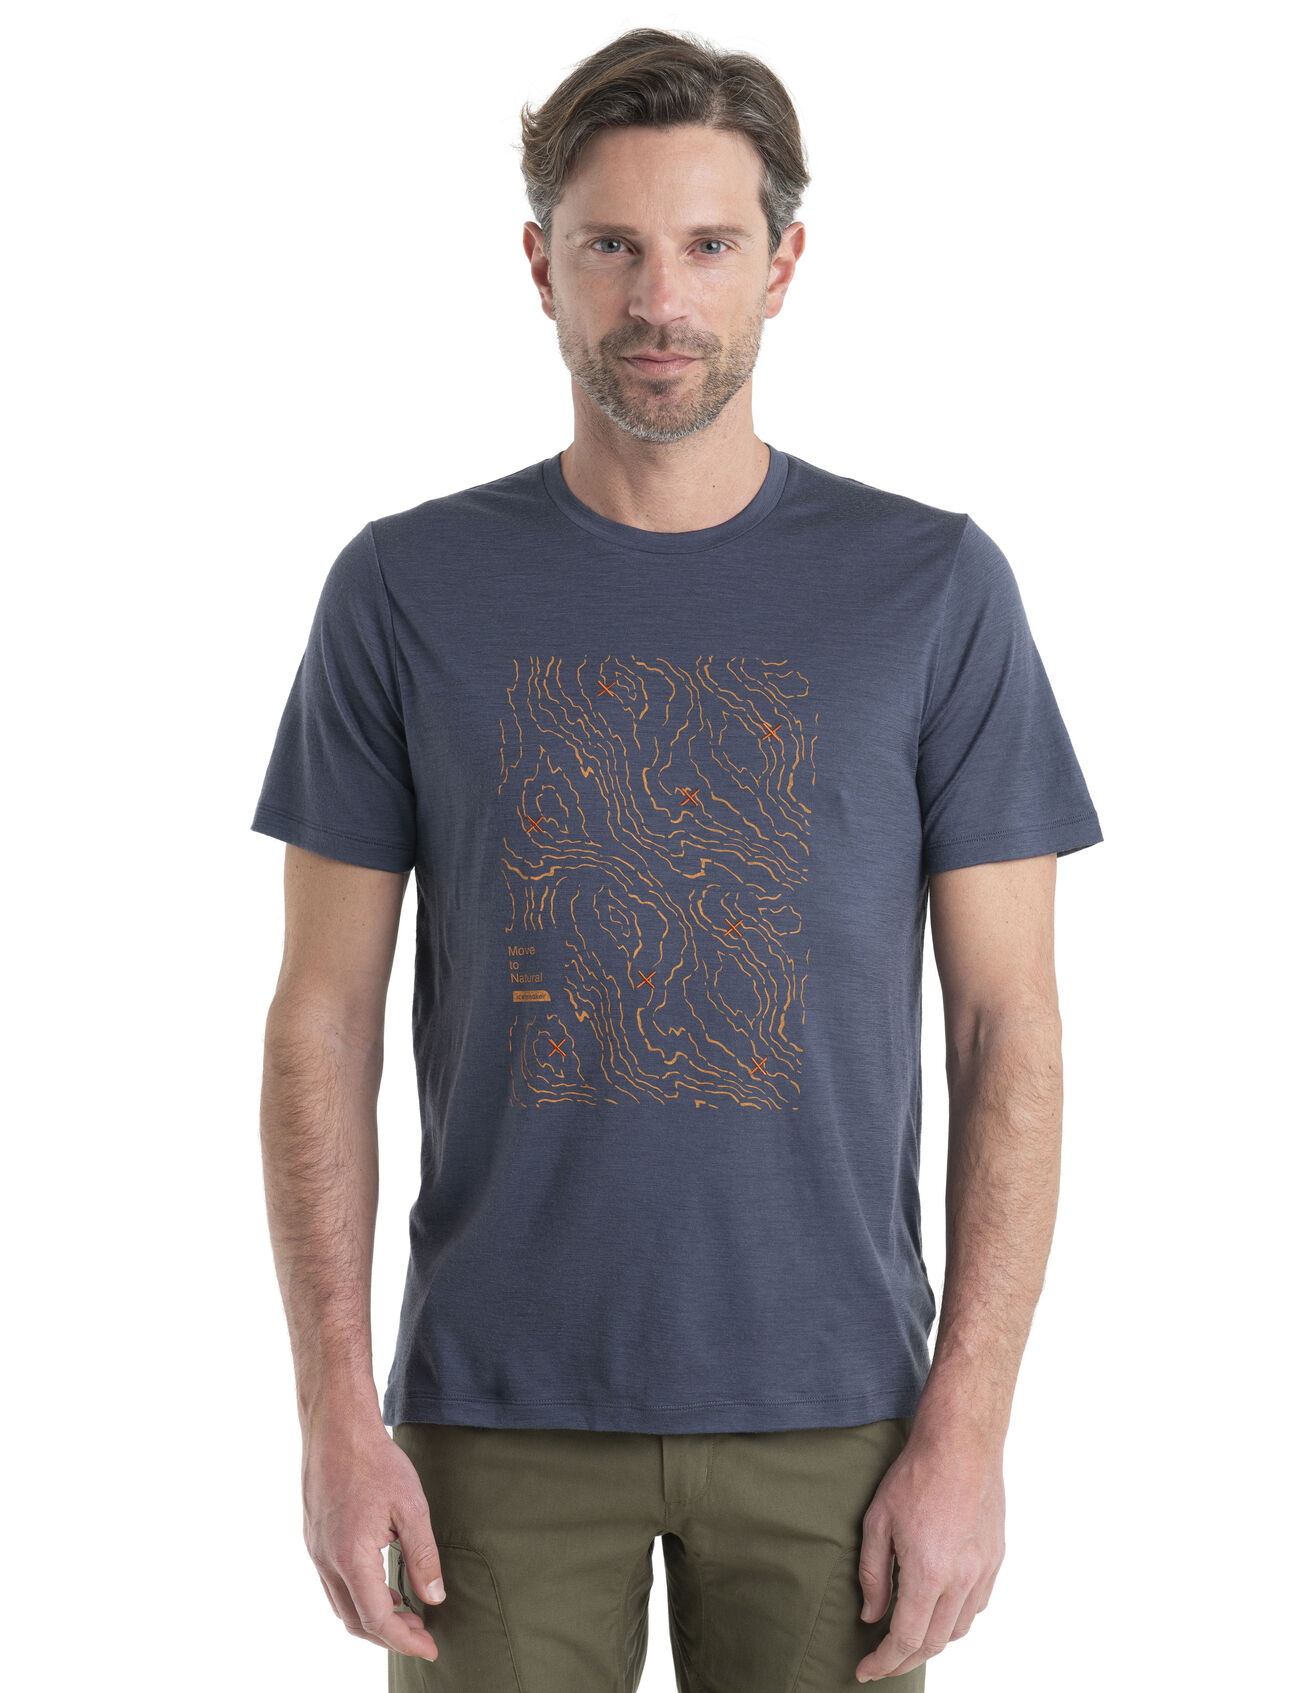 Mens Merino 150 Tech Lite II Short Sleeve T-Shirt Alpine Crossing Our versatile tech tee that provides comfort, breathability and odour-resistance for any adventure you can think of, the 150 Tech Lite II Short Sleeve Tee Alpine Crossing features 100% merino for all-natural performance. The tee's original artwork features a topo-inspired graphic of the Tongariro Alpine Crossing, one of New Zealand's most famous day hikes.